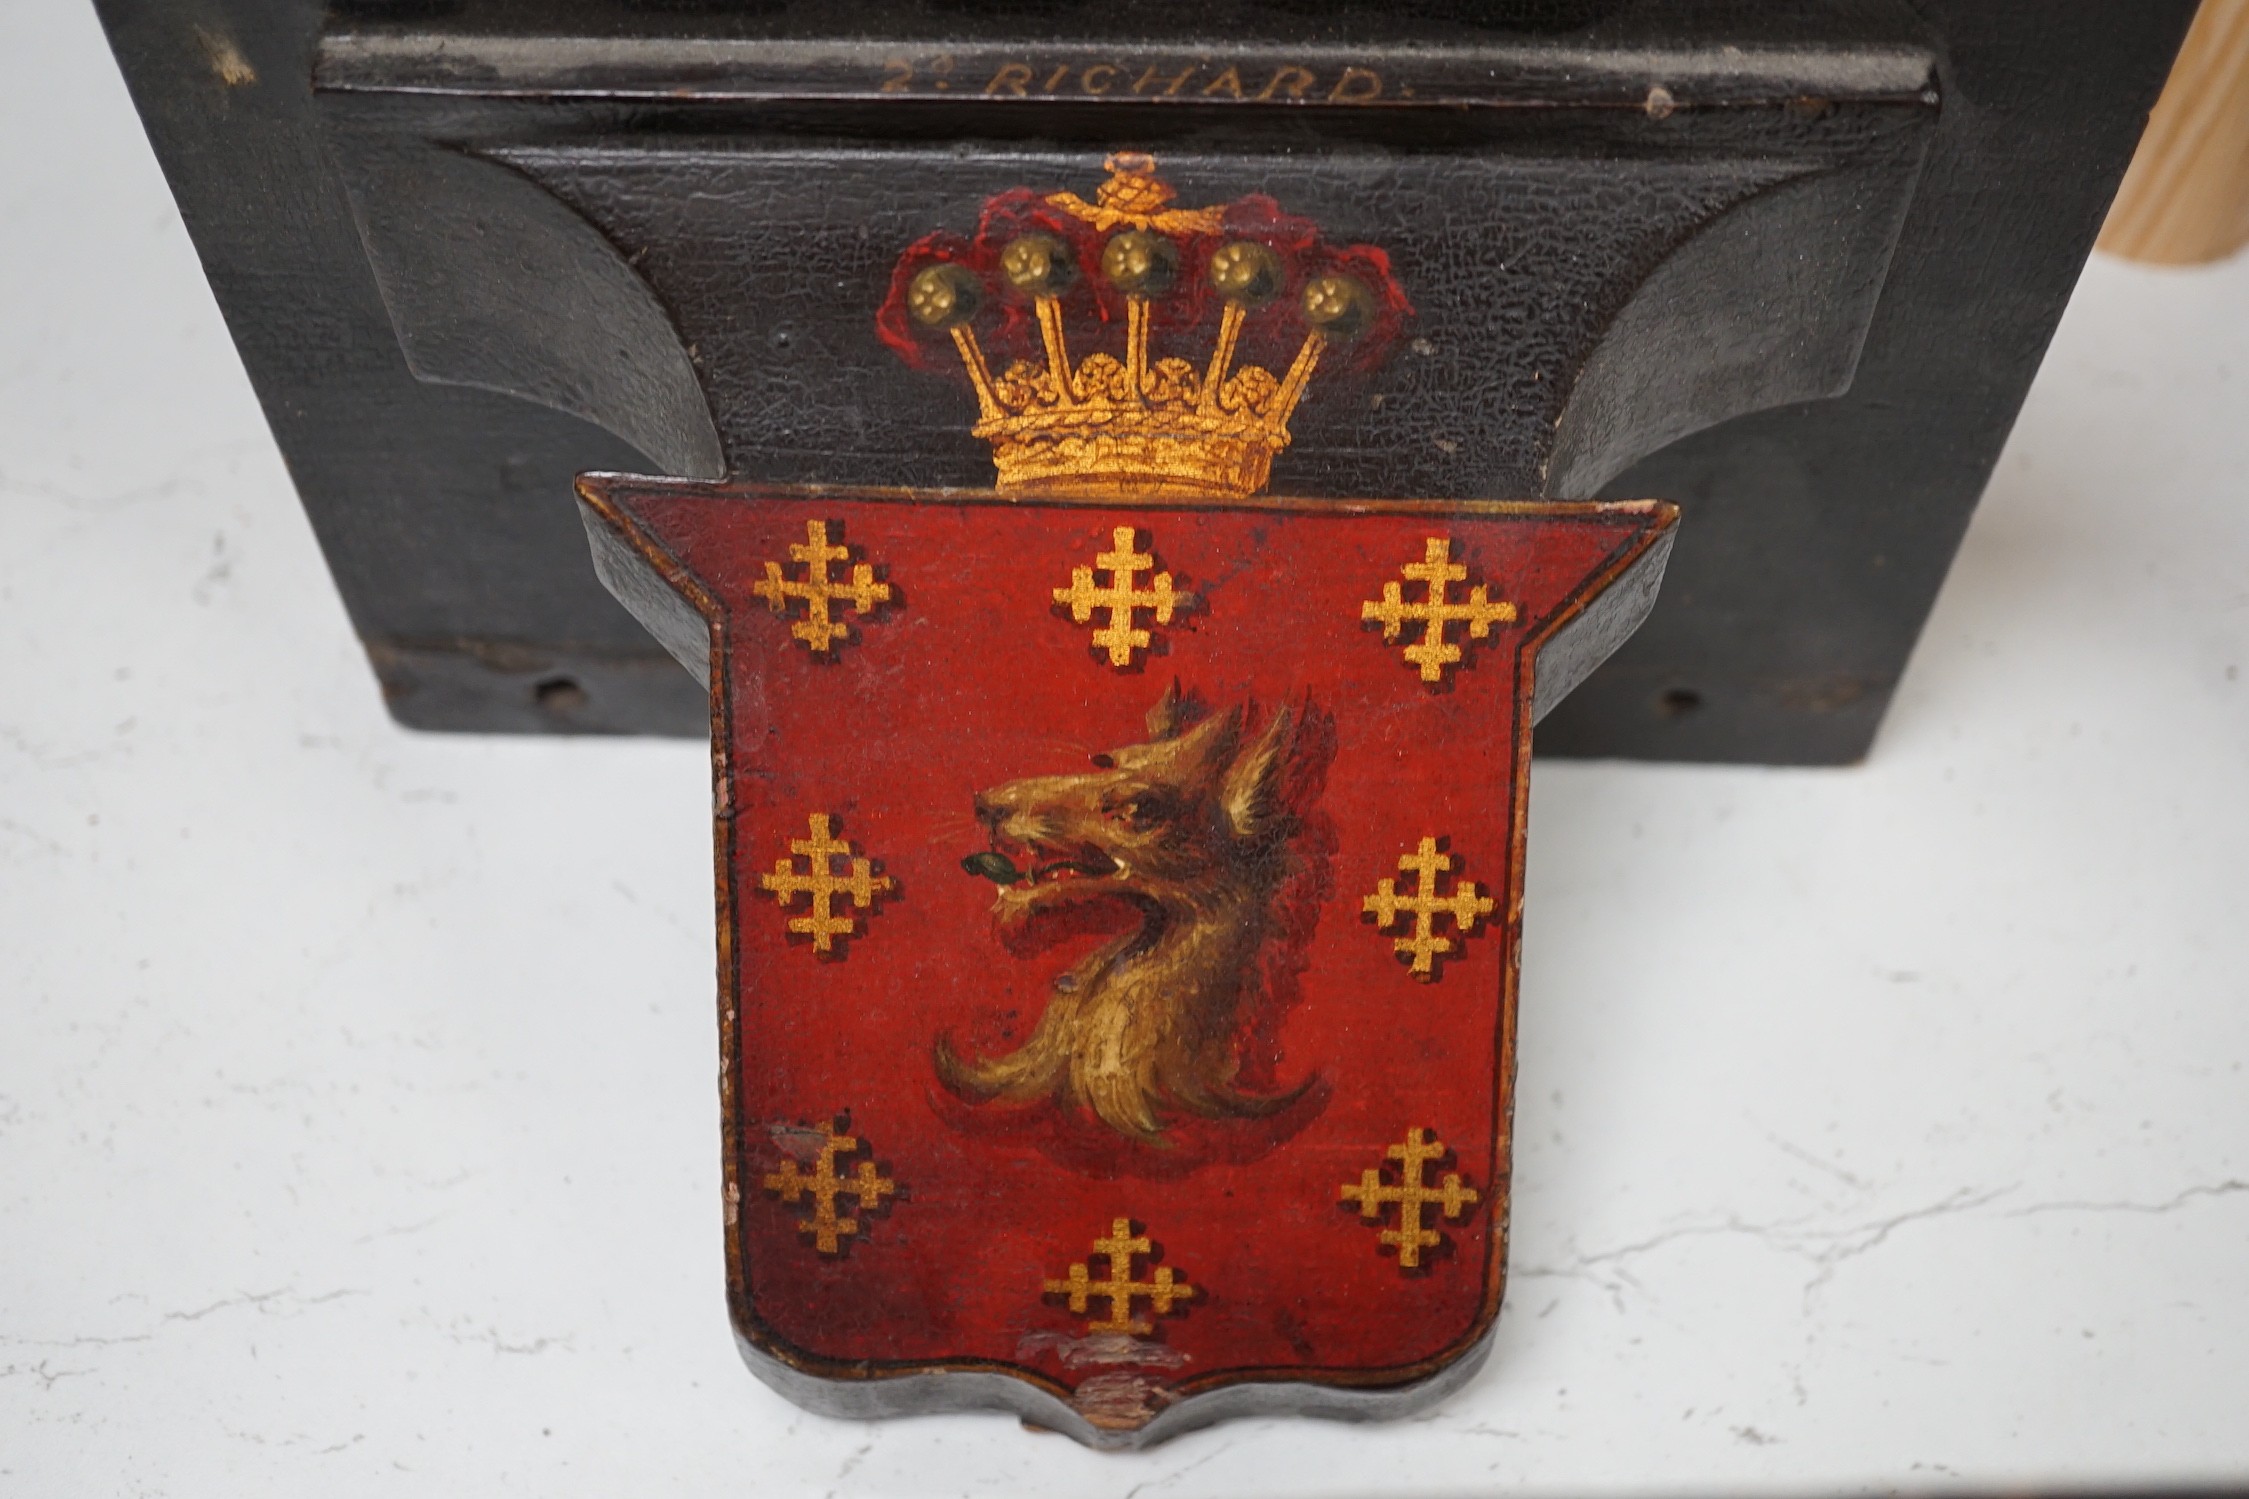 Four 19th century painted and ebonised heraldic wall brackets together with a 19th century armorial plaque